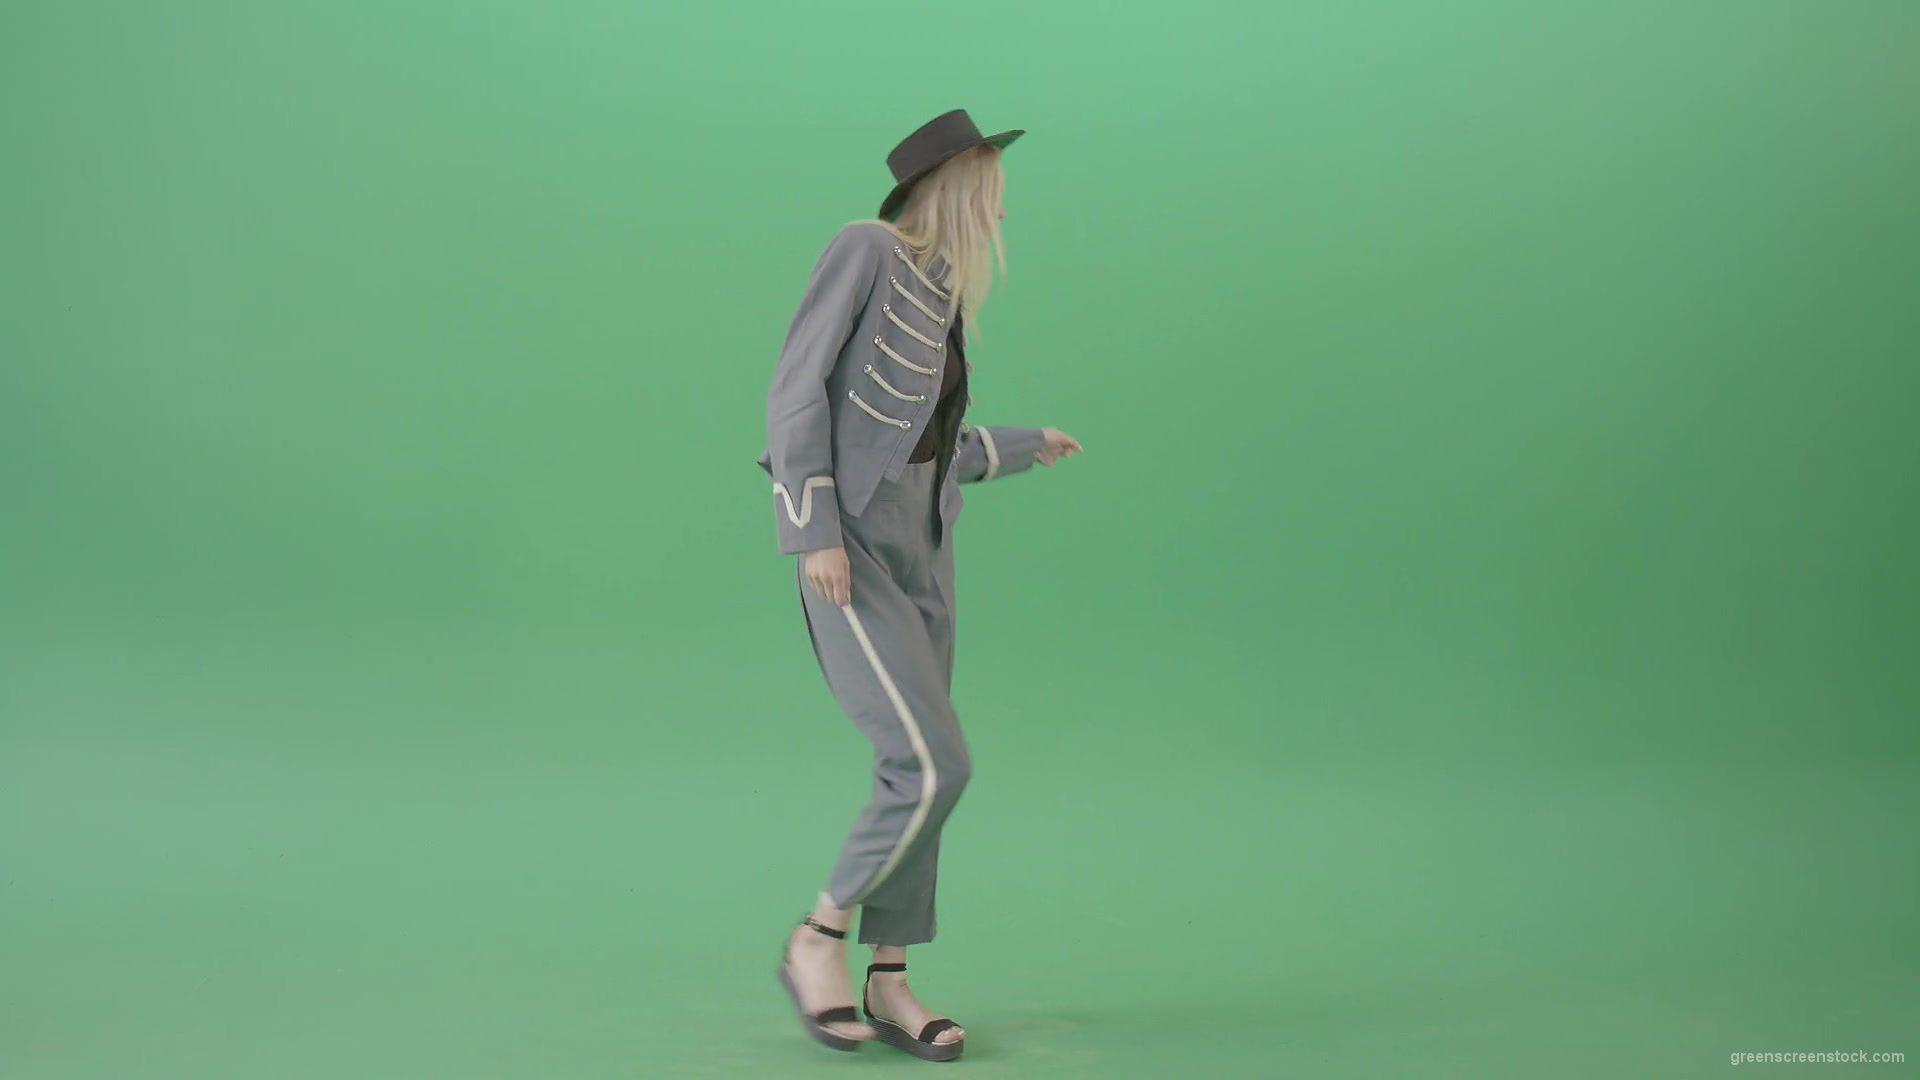 Blonde-Girl-in-Royal-dress-and-black-hat-dancing-house-and-chilling-in-green-screen-studio-4K-Video-Footage-1920_009 Green Screen Stock